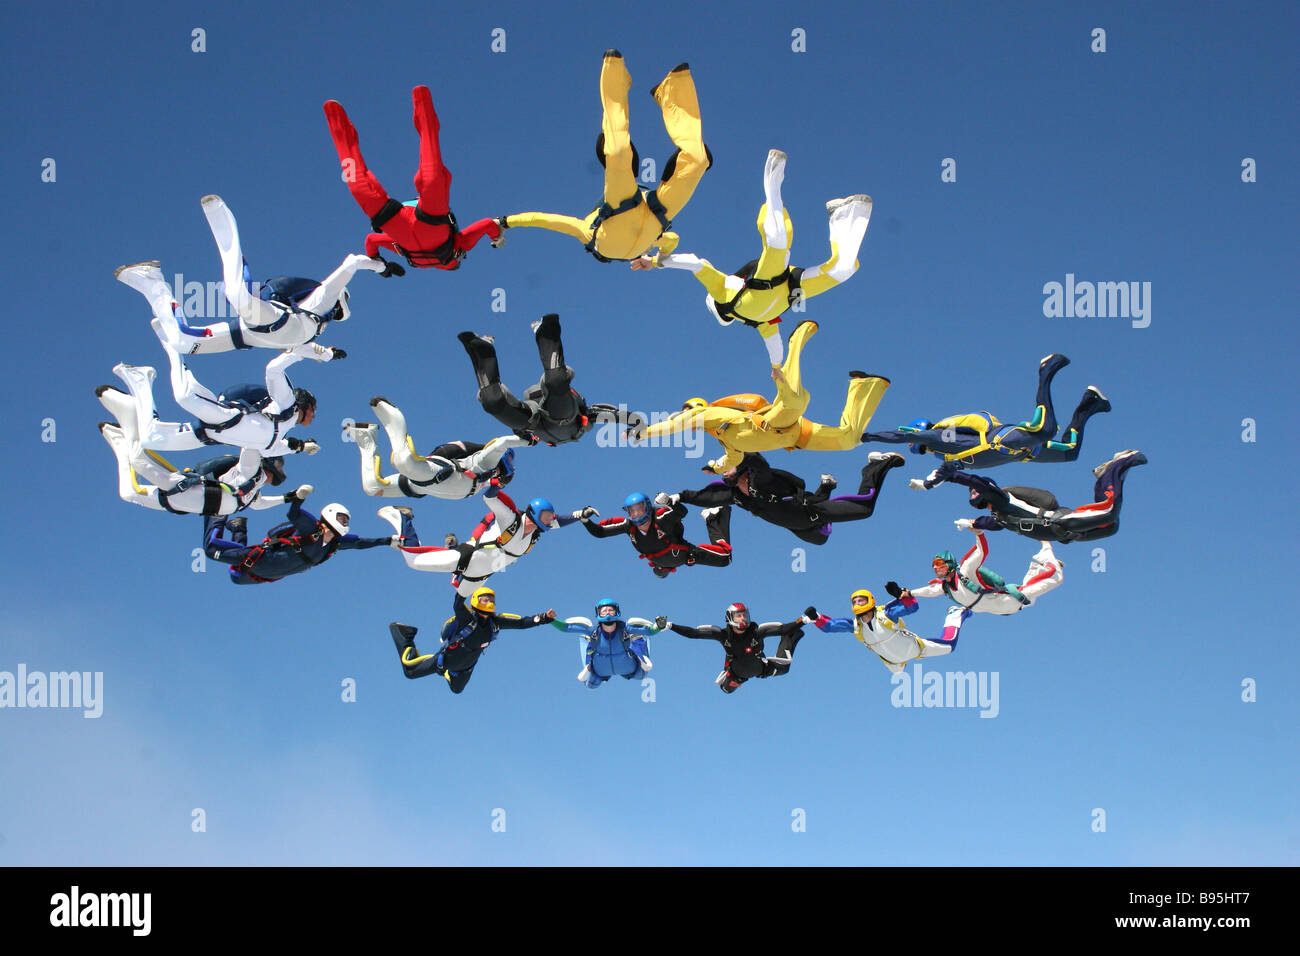 Group Sky diving in a circle Stock Photo